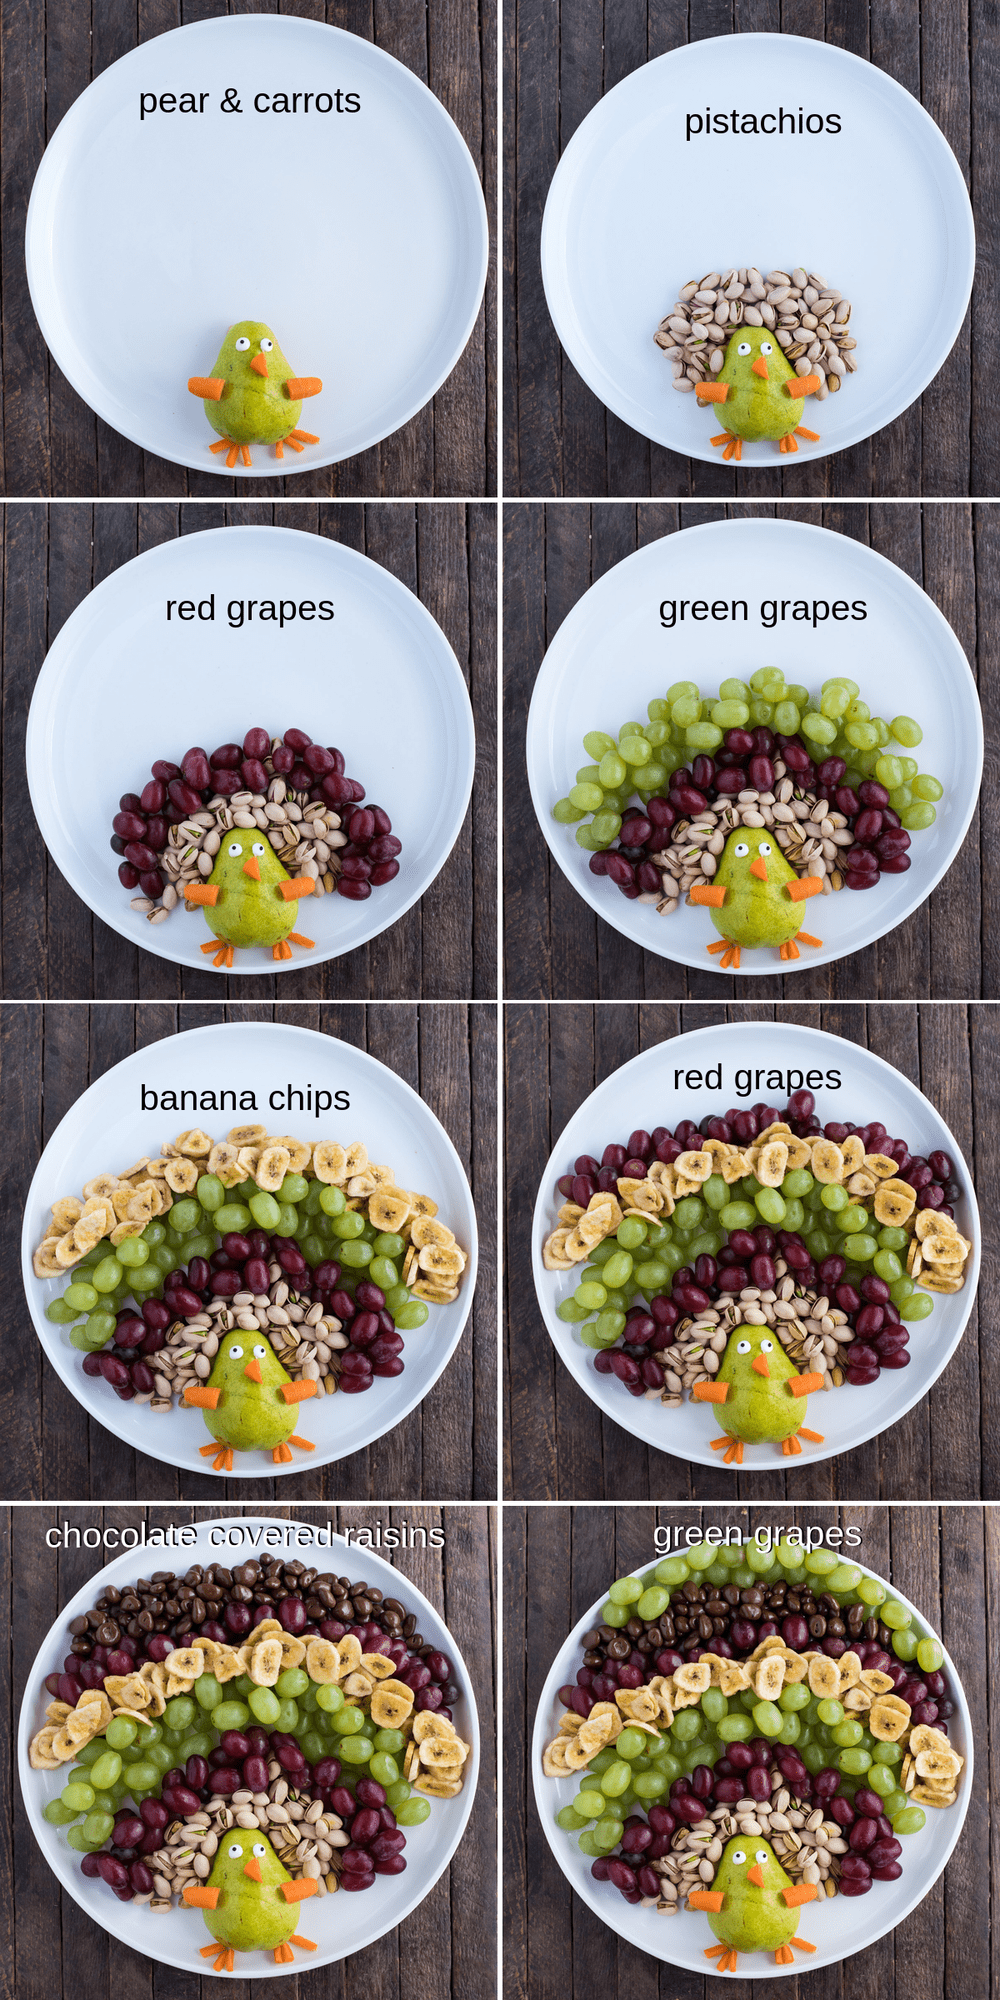 step by step how to make turkey shaped fruit tray with pistachios, grapes, banana chips, and pear and carrots on round white platter on wood background